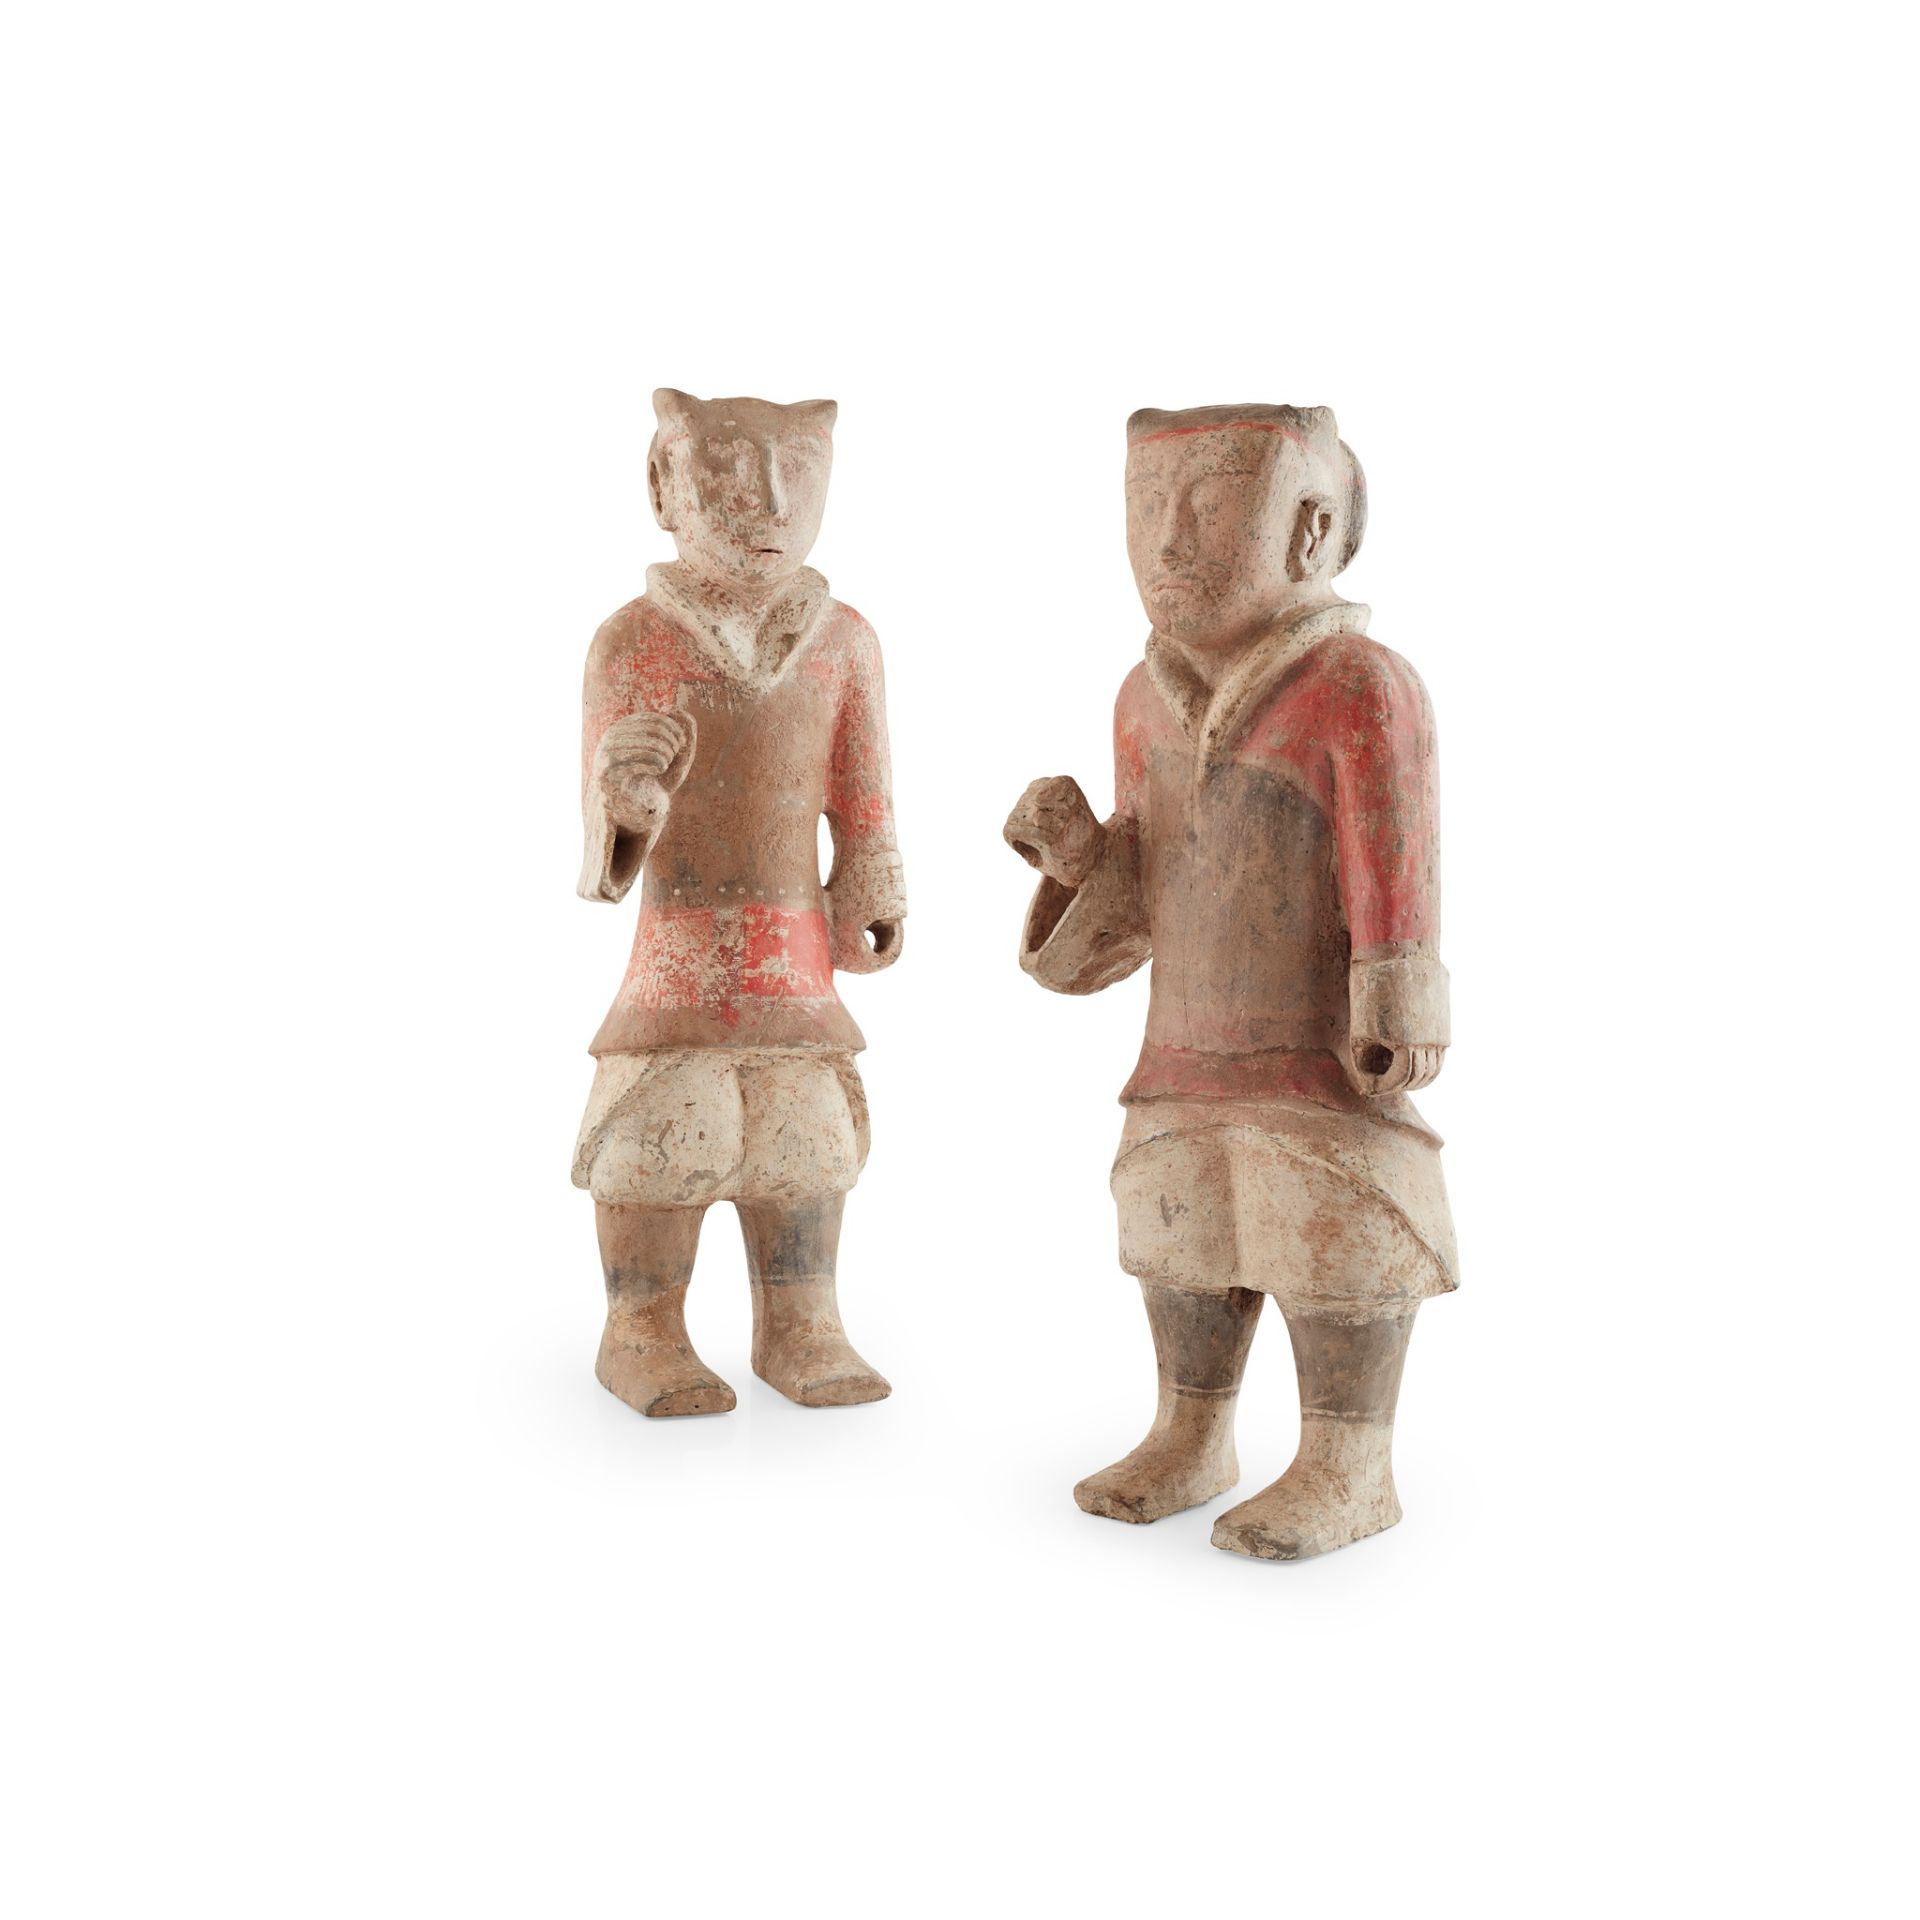 NEAR PAIR OF PAINTED POTTERY FIGURES HAN DYNASTY OR LATER